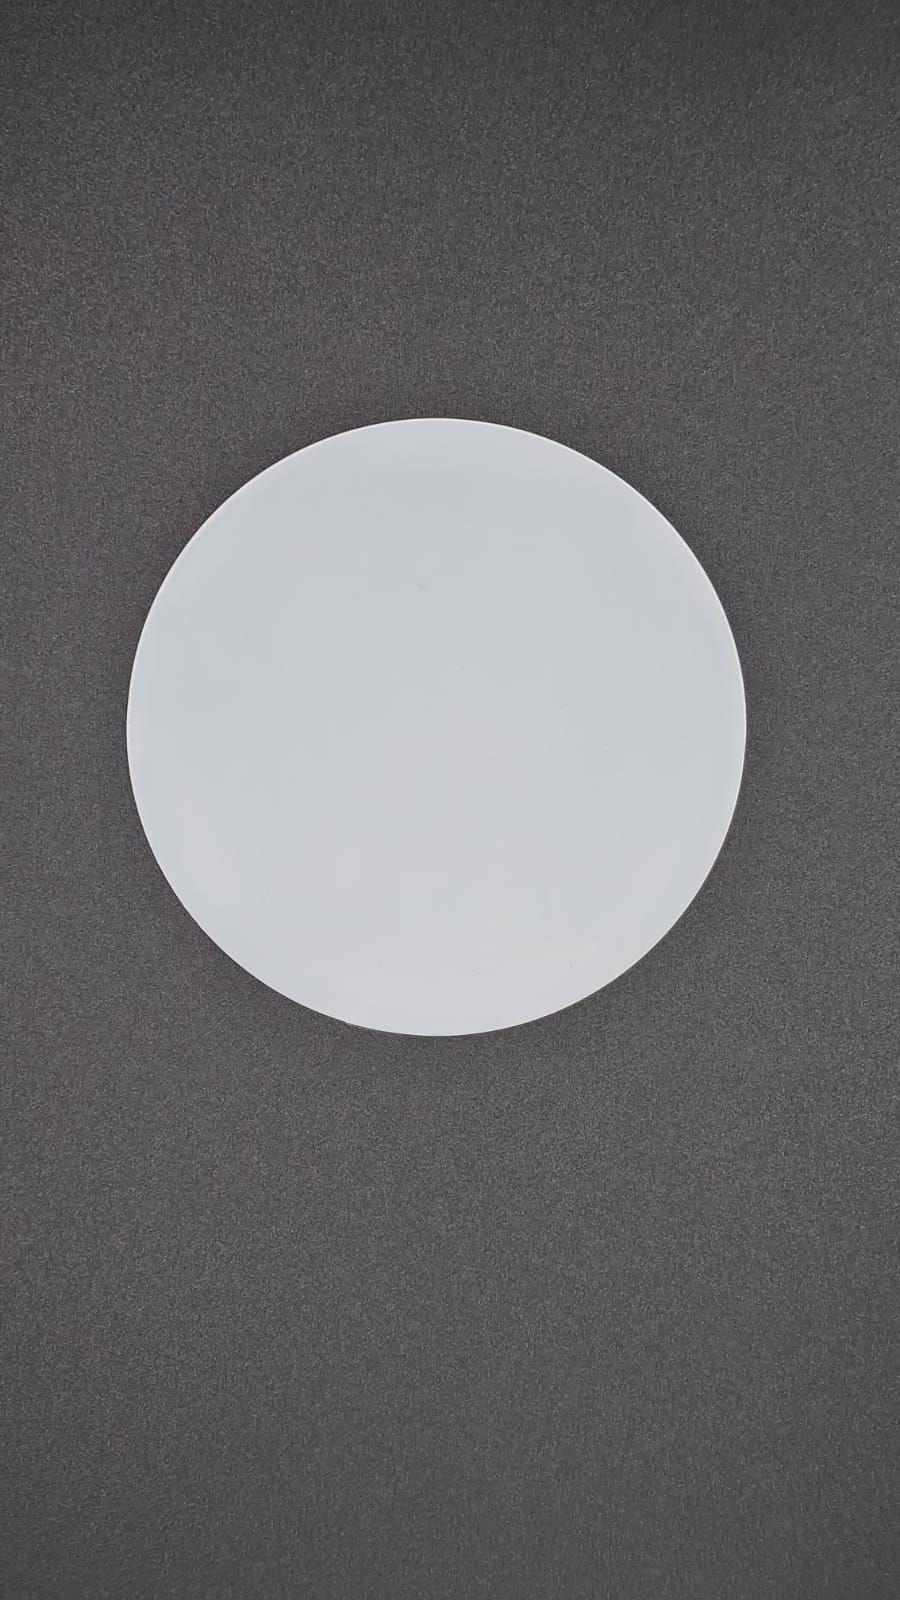 Acrylic Circle Disc (8cm Pack of 6)